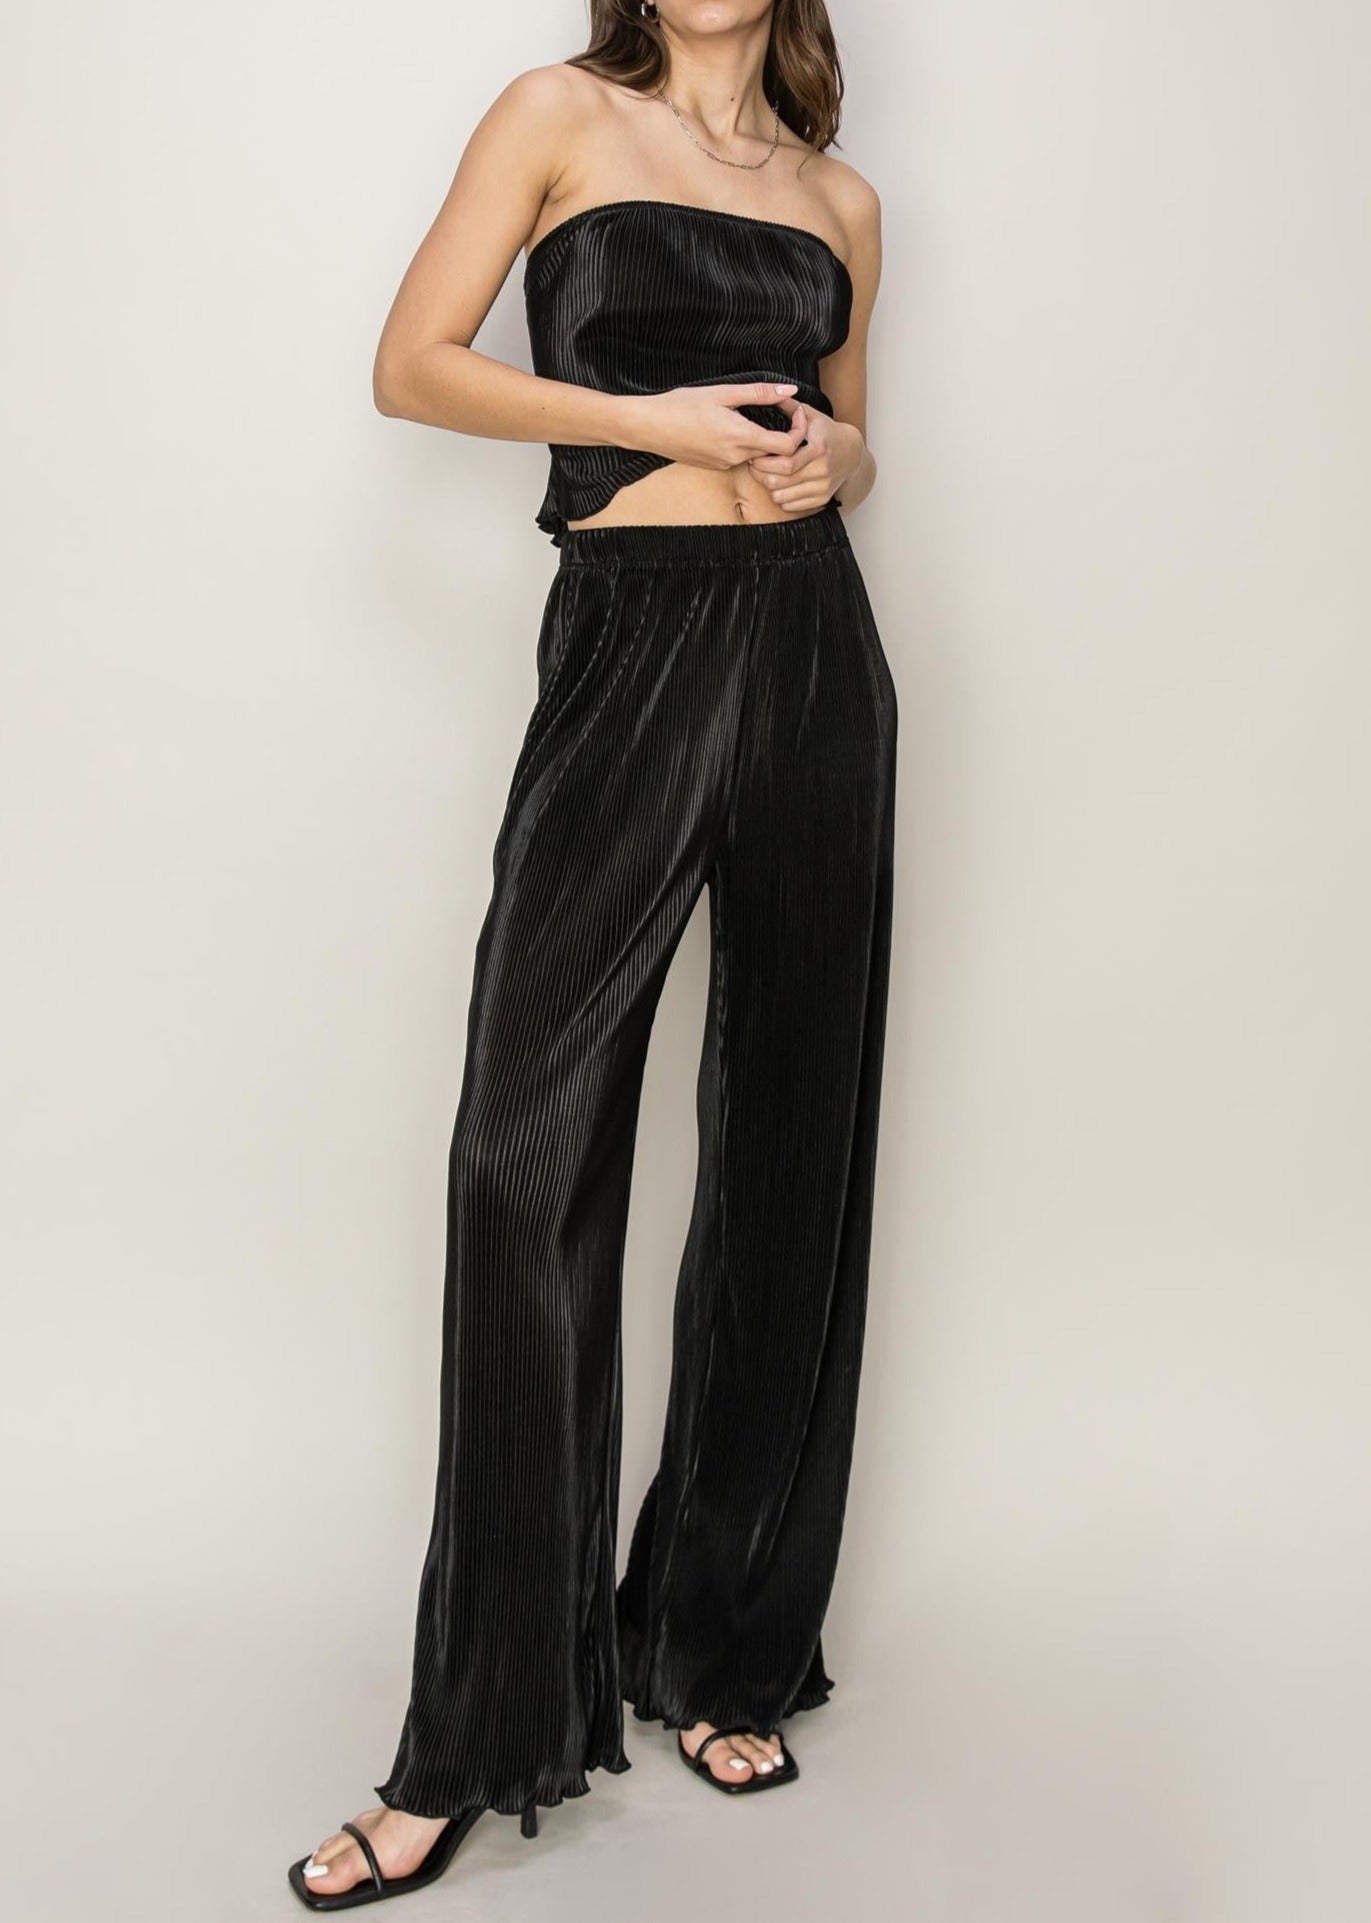 Women's pleated tube top and matching pants set